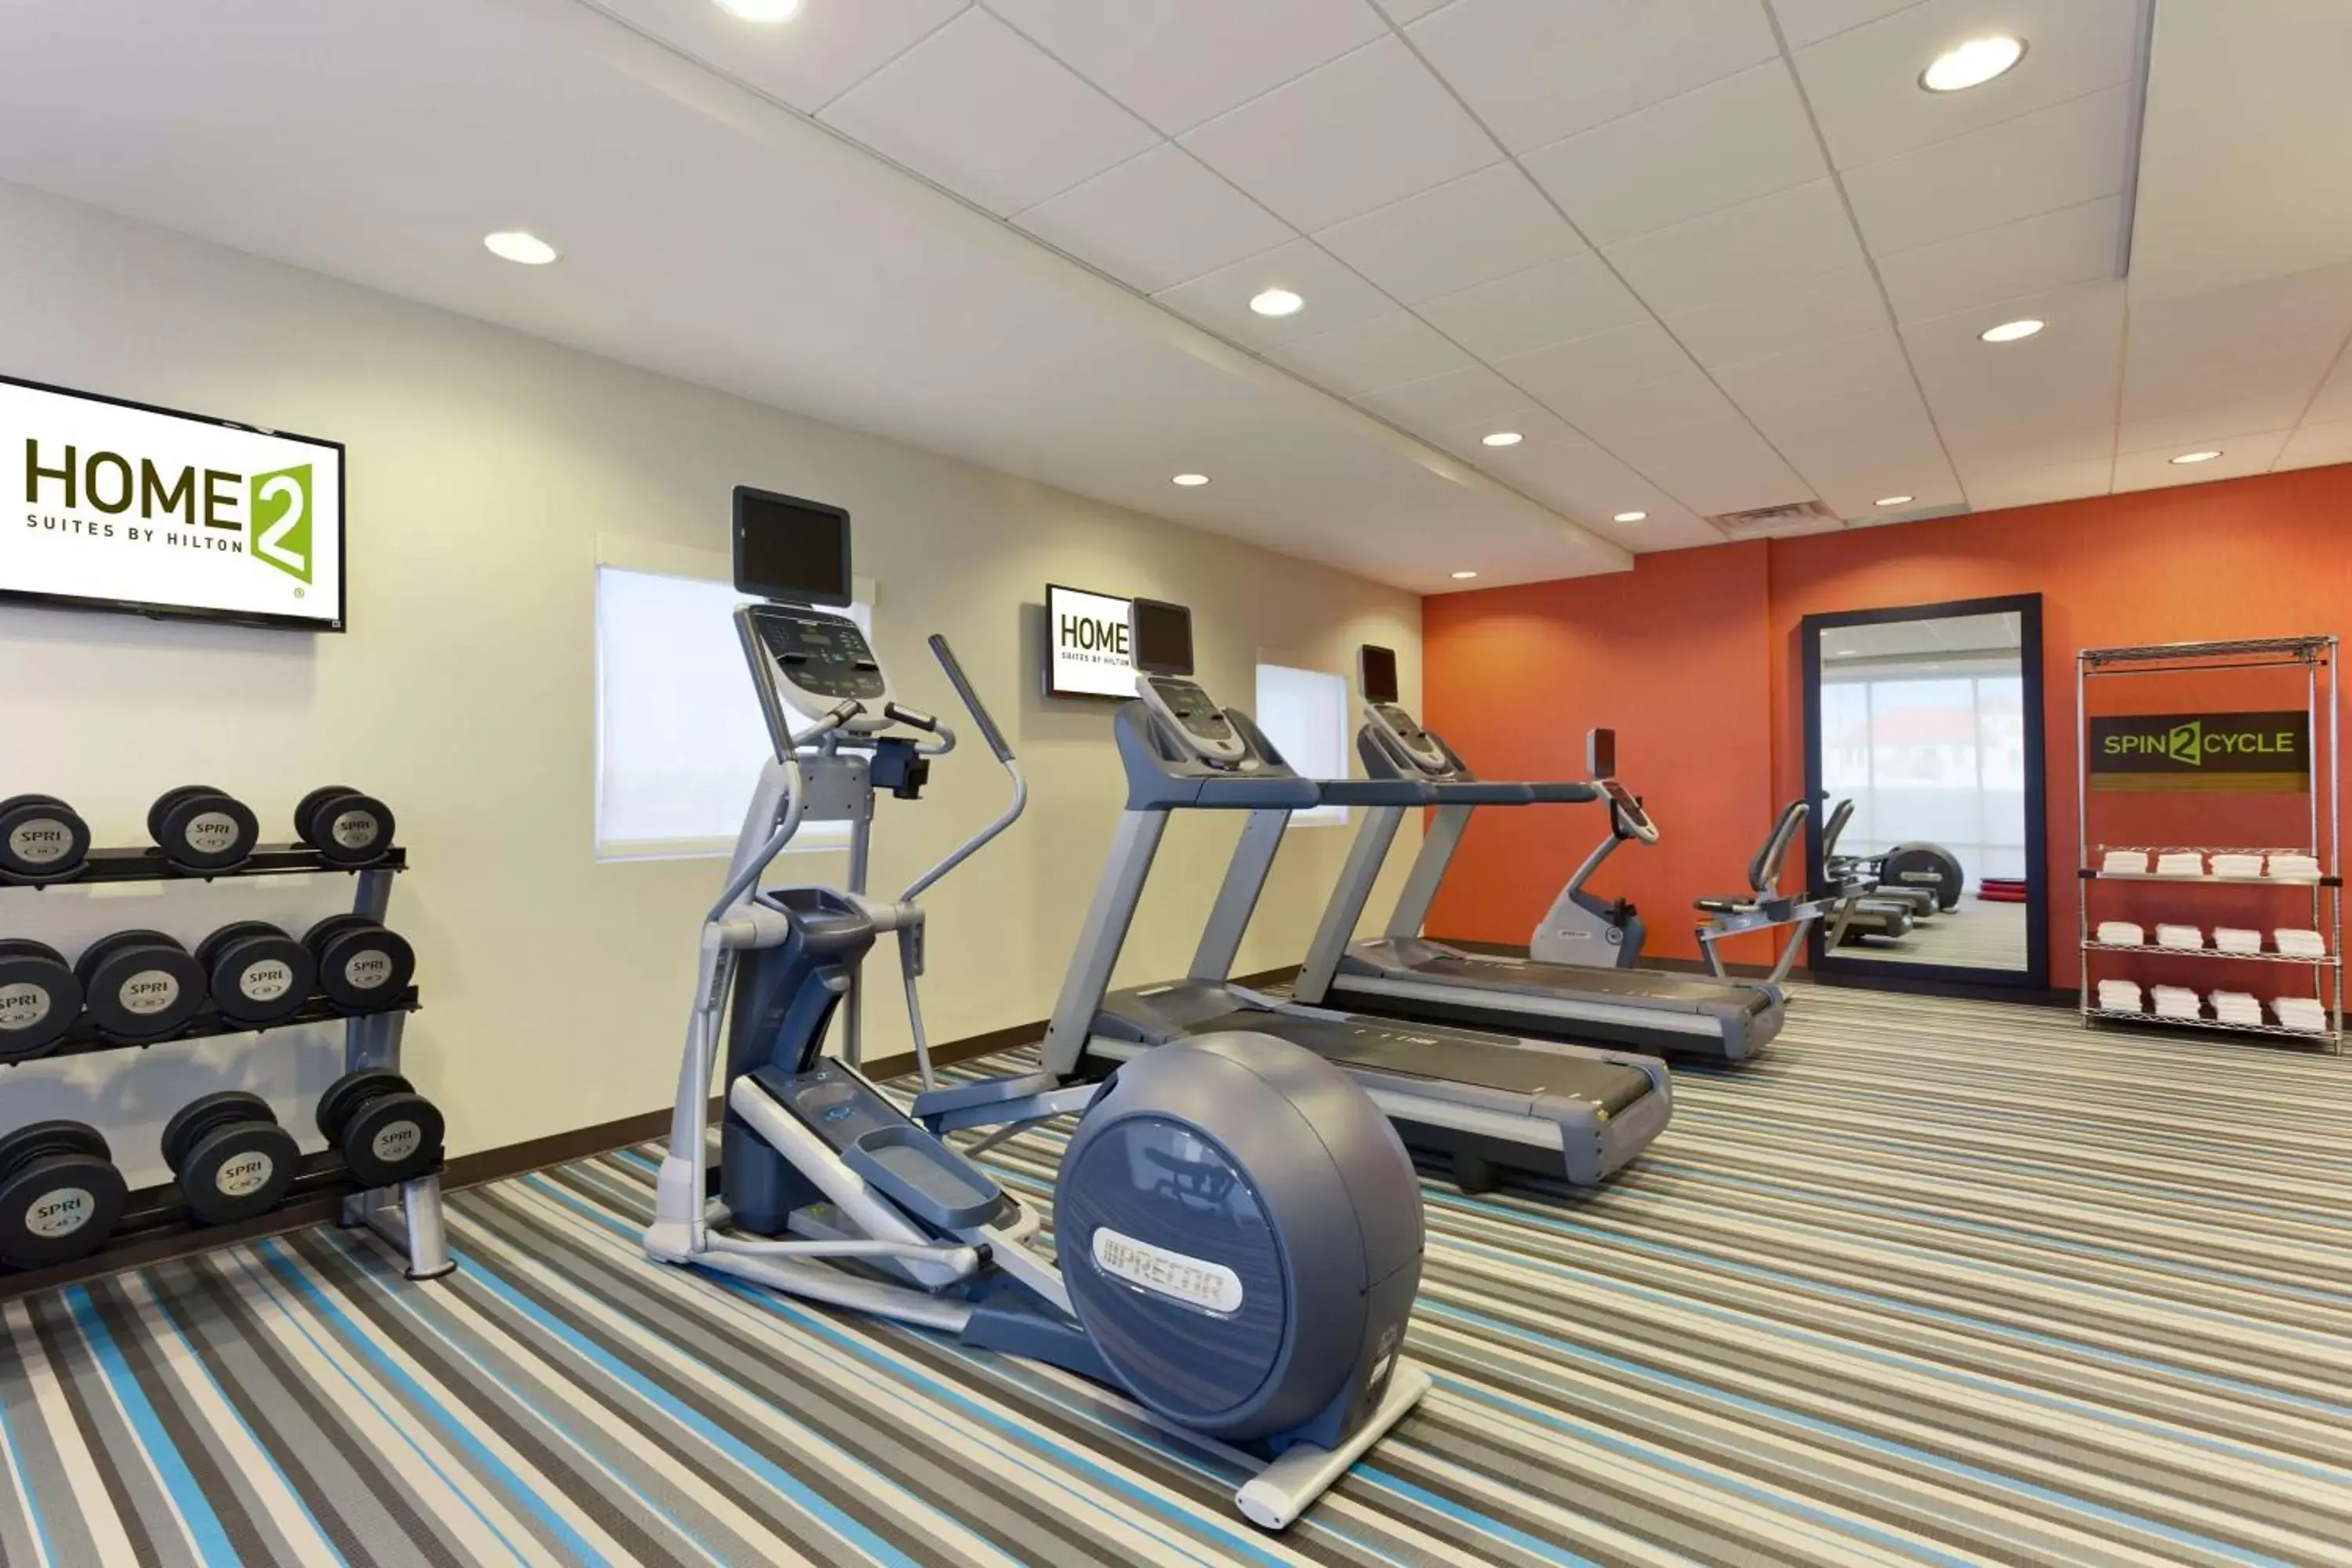 Fitness centre/facilities, Fitness Center/Facilities in Home2 Suites by Hilton Baltimore/Aberdeen MD